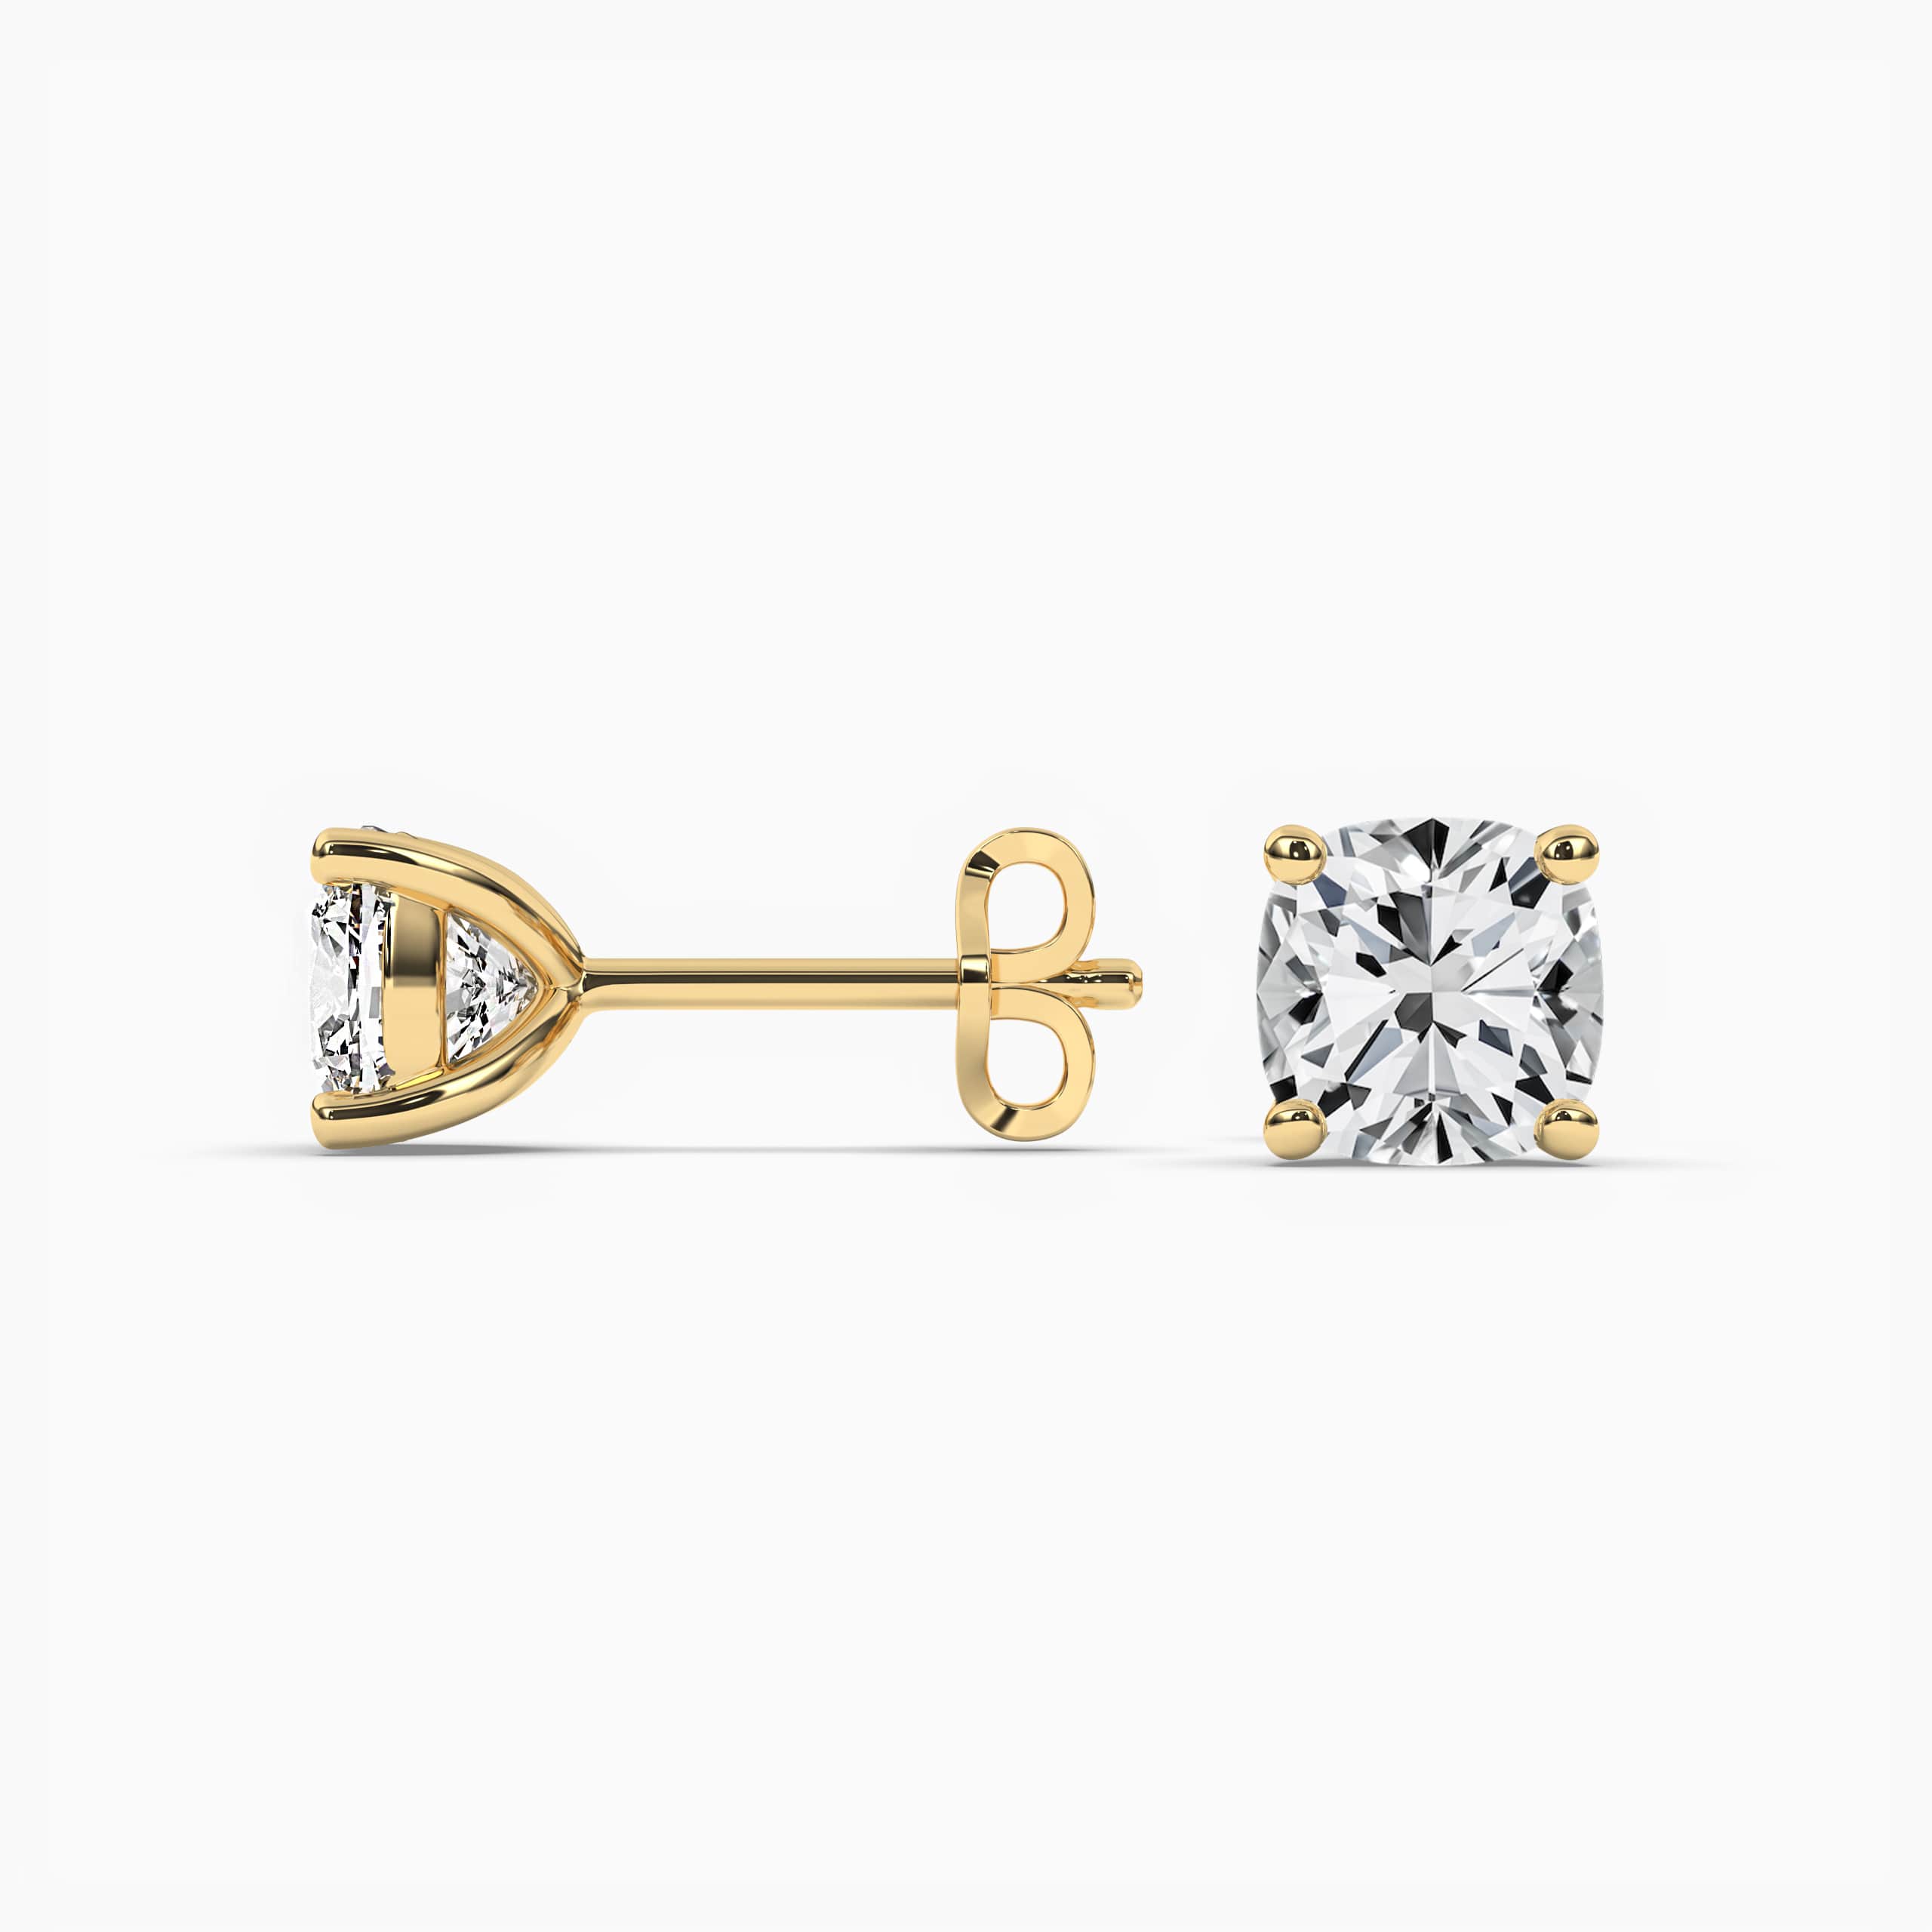 Cushion Cut Solitaire Diamond Stud Earrings in Yellow Gold